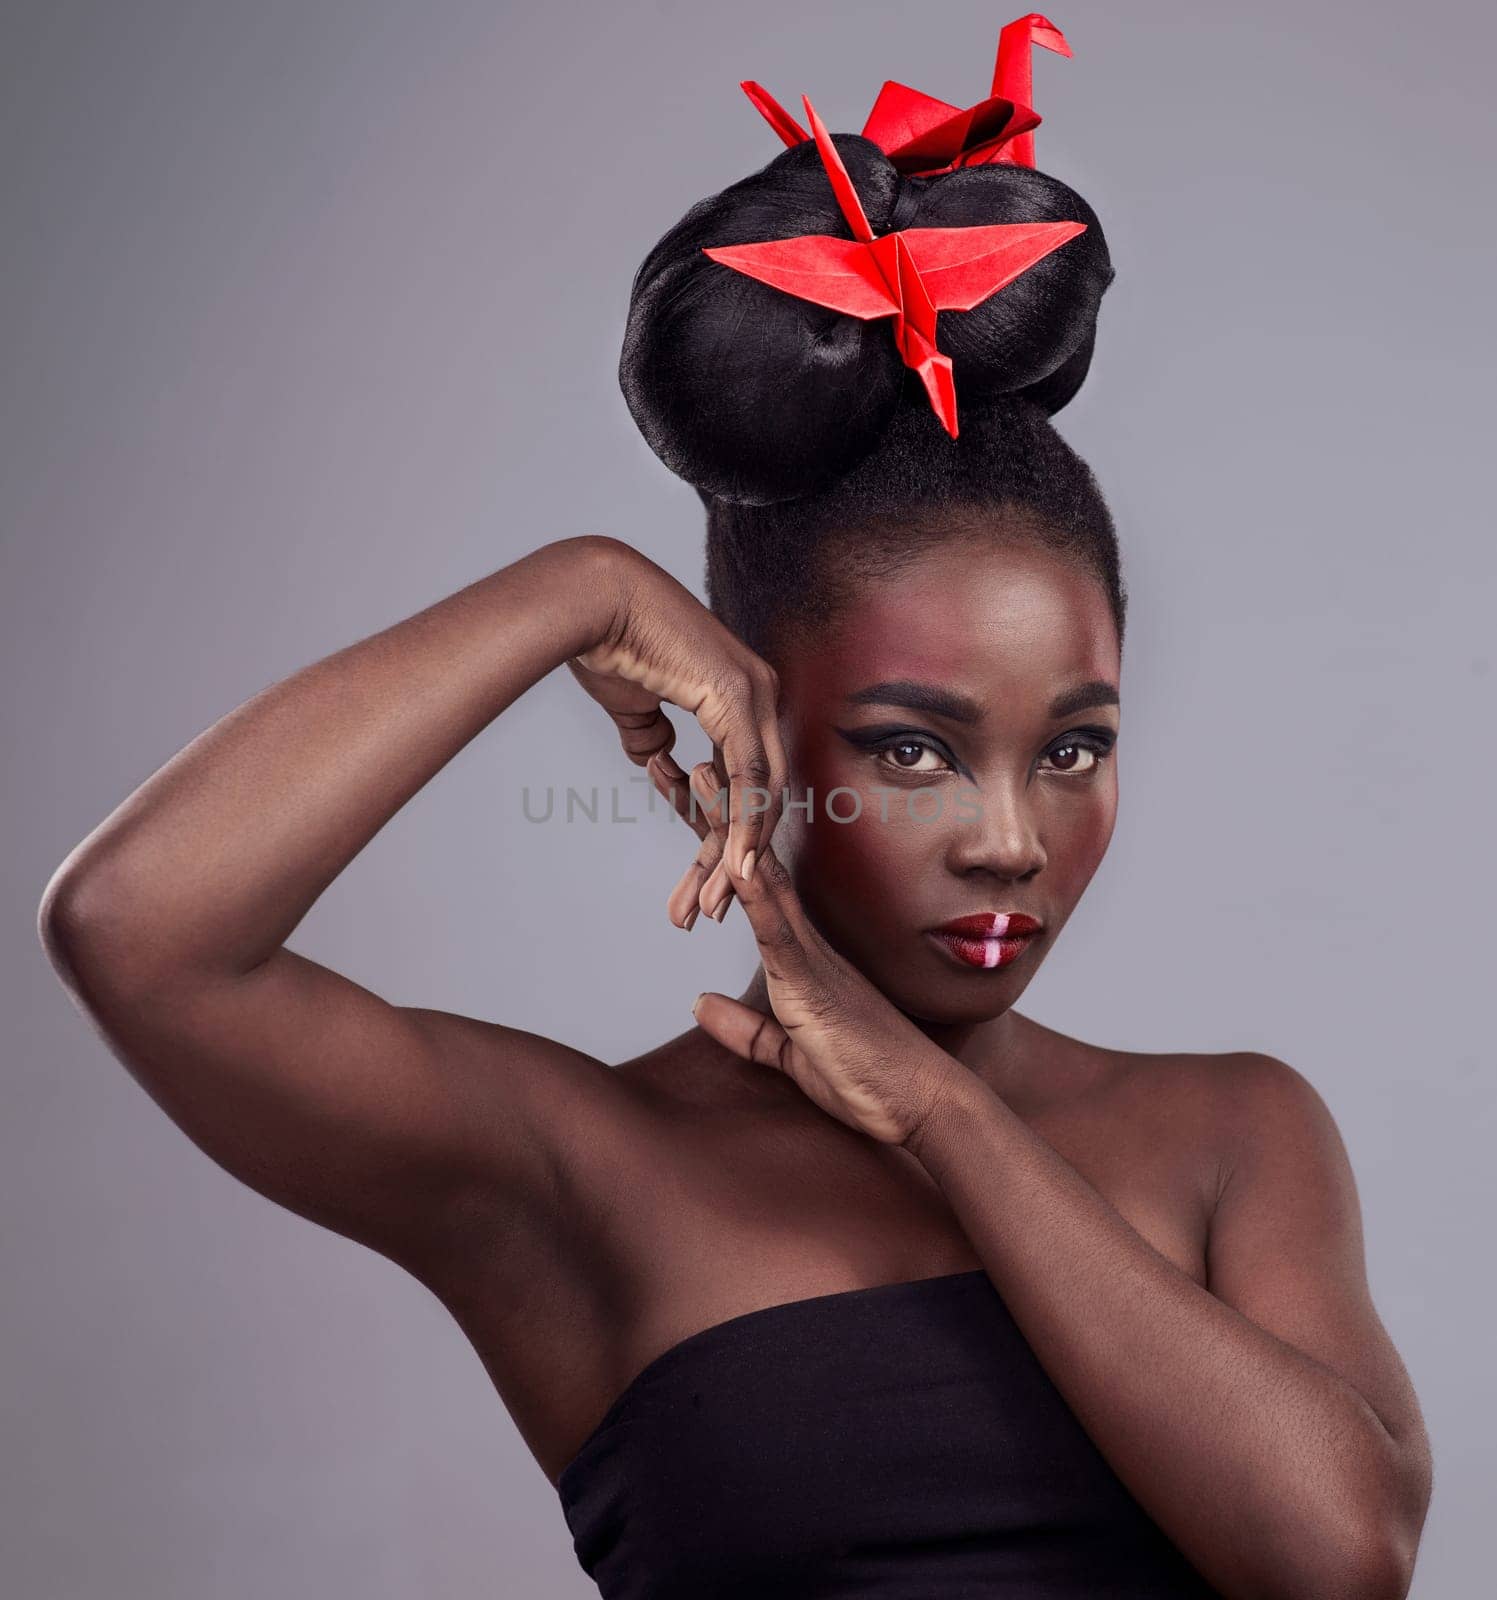 Woman, makeup portrait and origami in studio for beauty with red, oriental culture and paper bird. African model, bold cosmetics and grey background for art deco, confidence and creative with design.